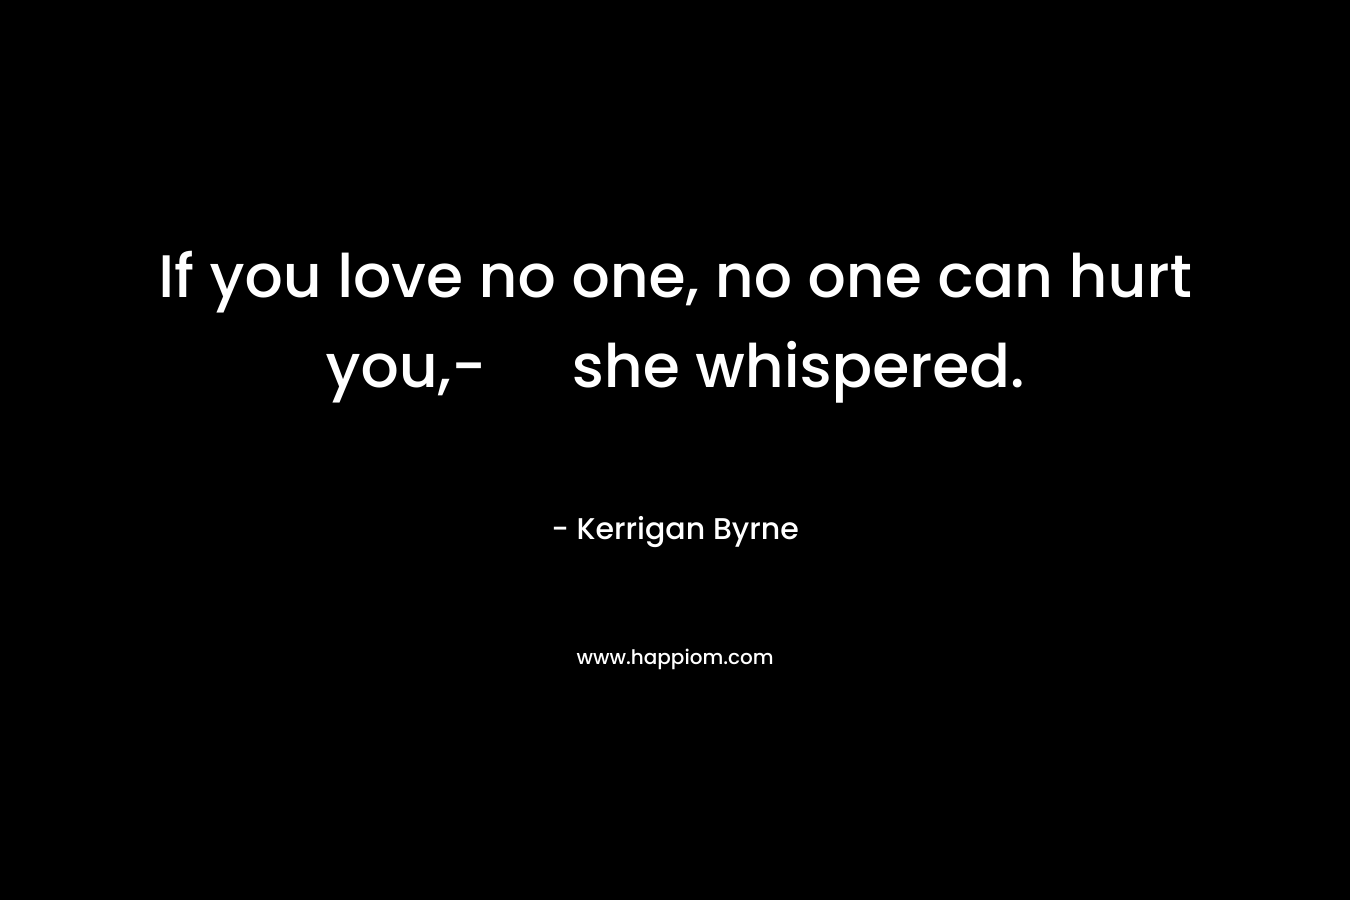 If you love no one, no one can hurt you,- she whispered.